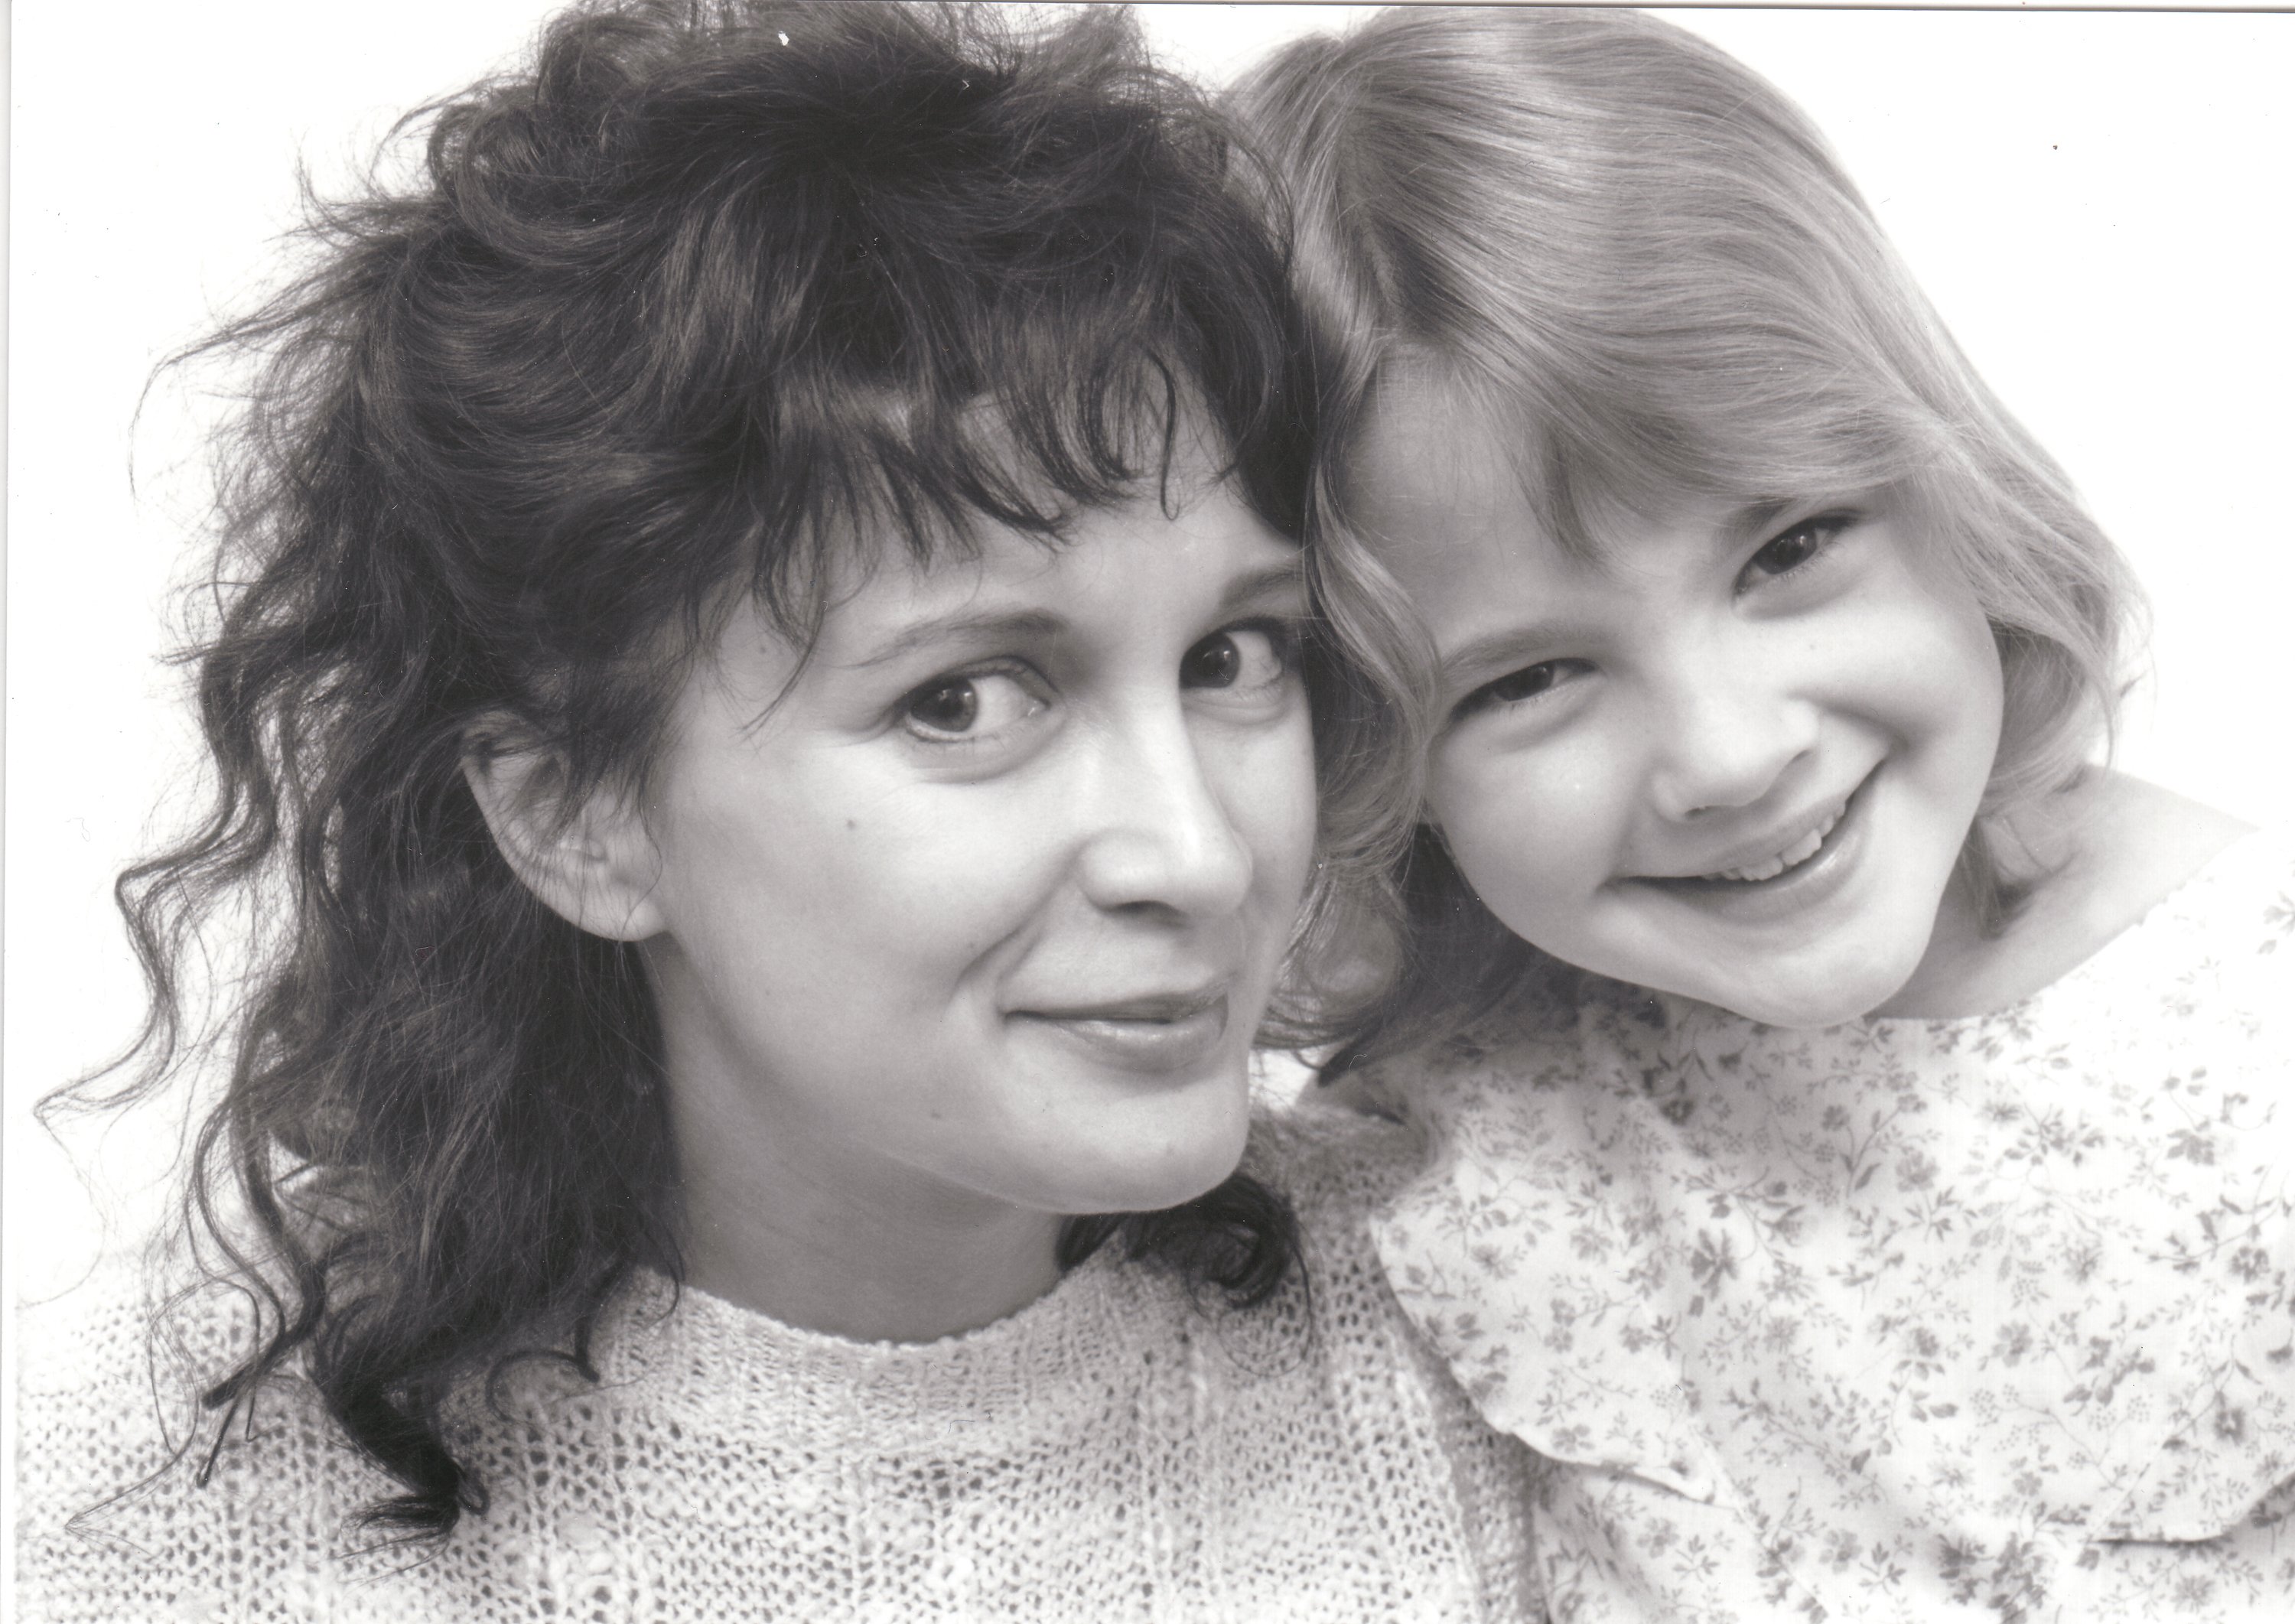 Drew Barrymore and her mother Jaid circa 1982 | Source: Getty Images